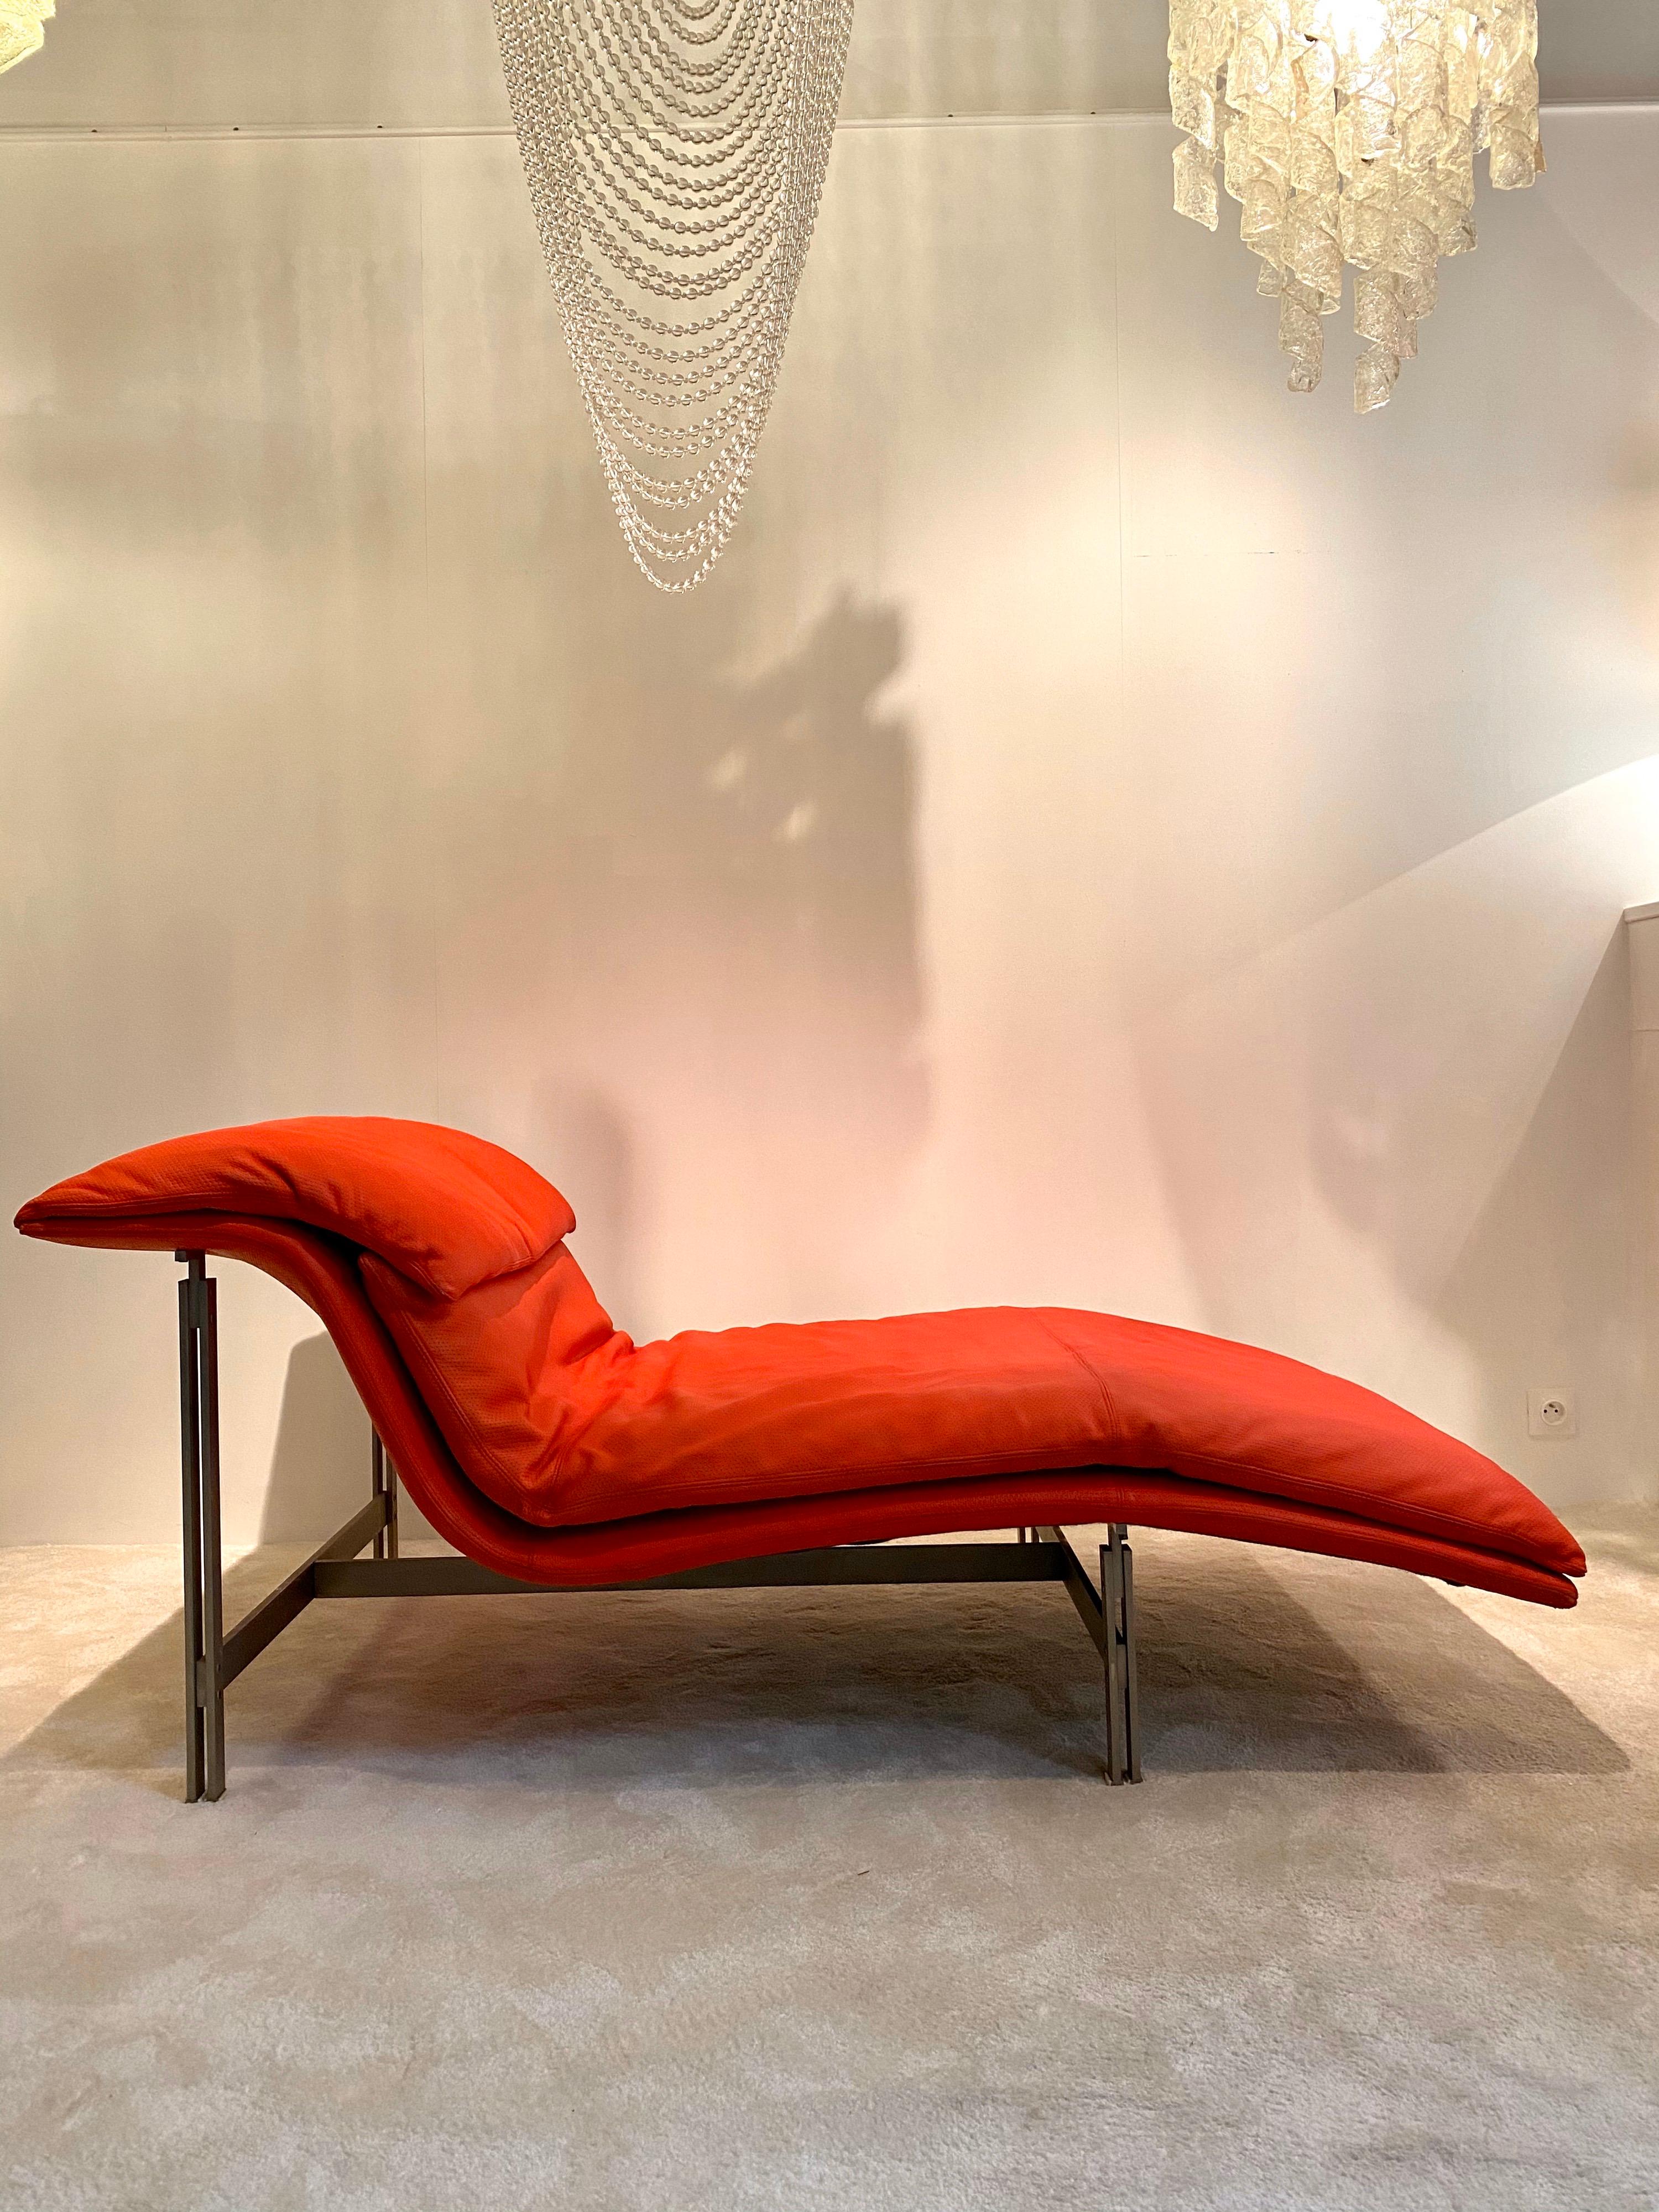 Iconic “Wave”or “Onda” lounge chair designed by Giovanni Offredi for the famous manufacture Saporiti Italia (signed inside).
Comfortable, stylish chair executed in perforated red leather and a steel brushed structure.
A beautiful movement to fit